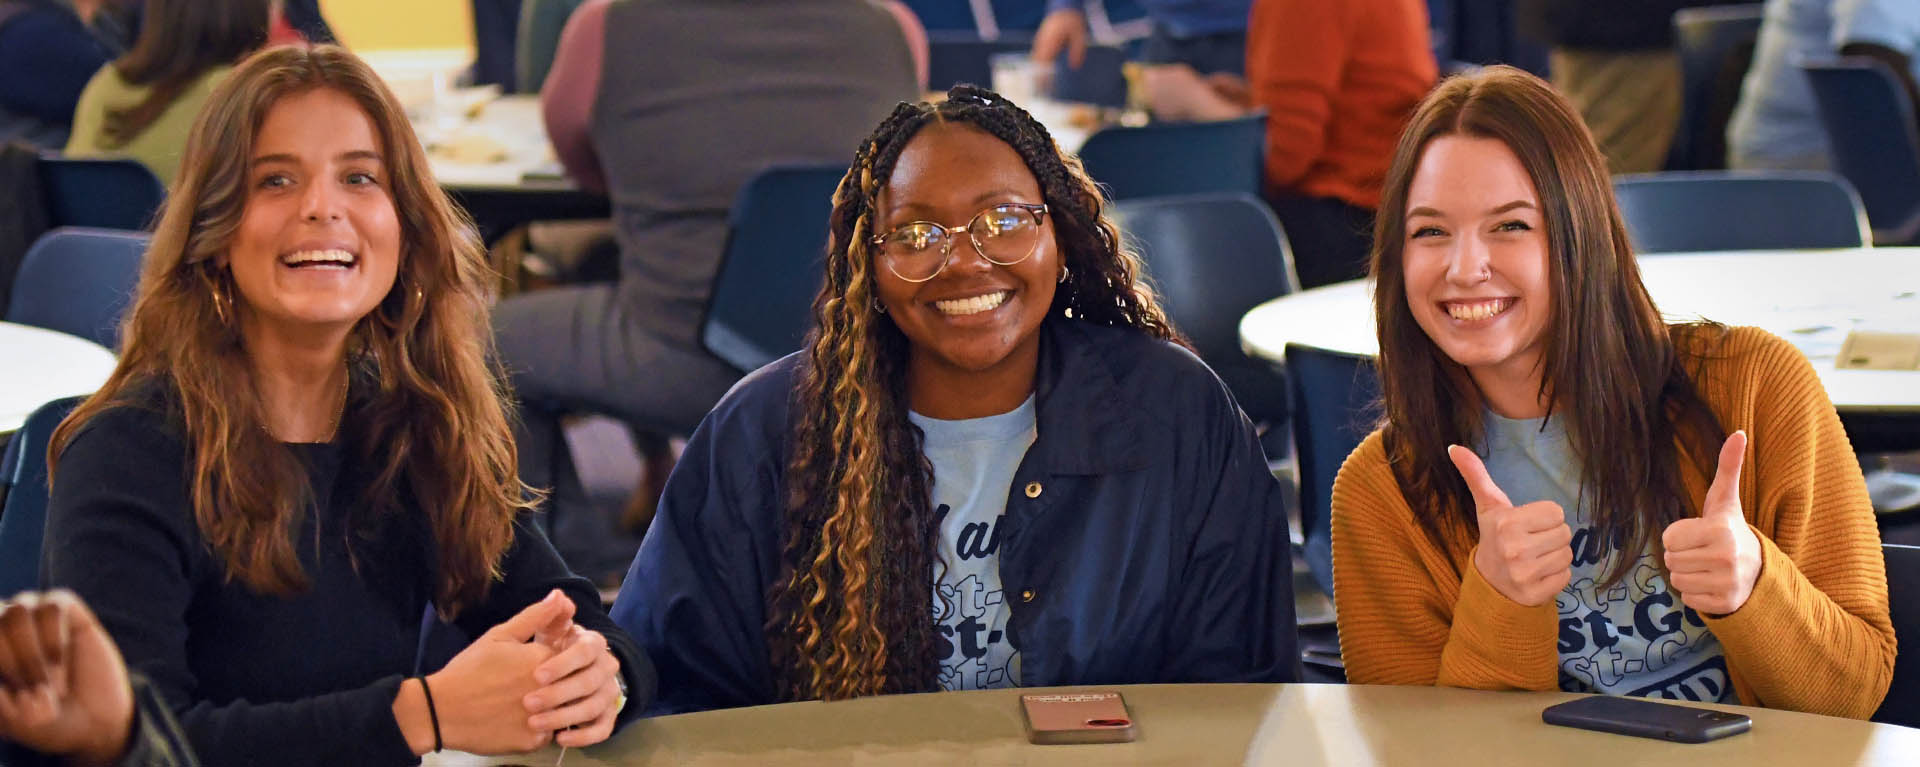 Three Washburn students smile while sitting at a table together at an event.